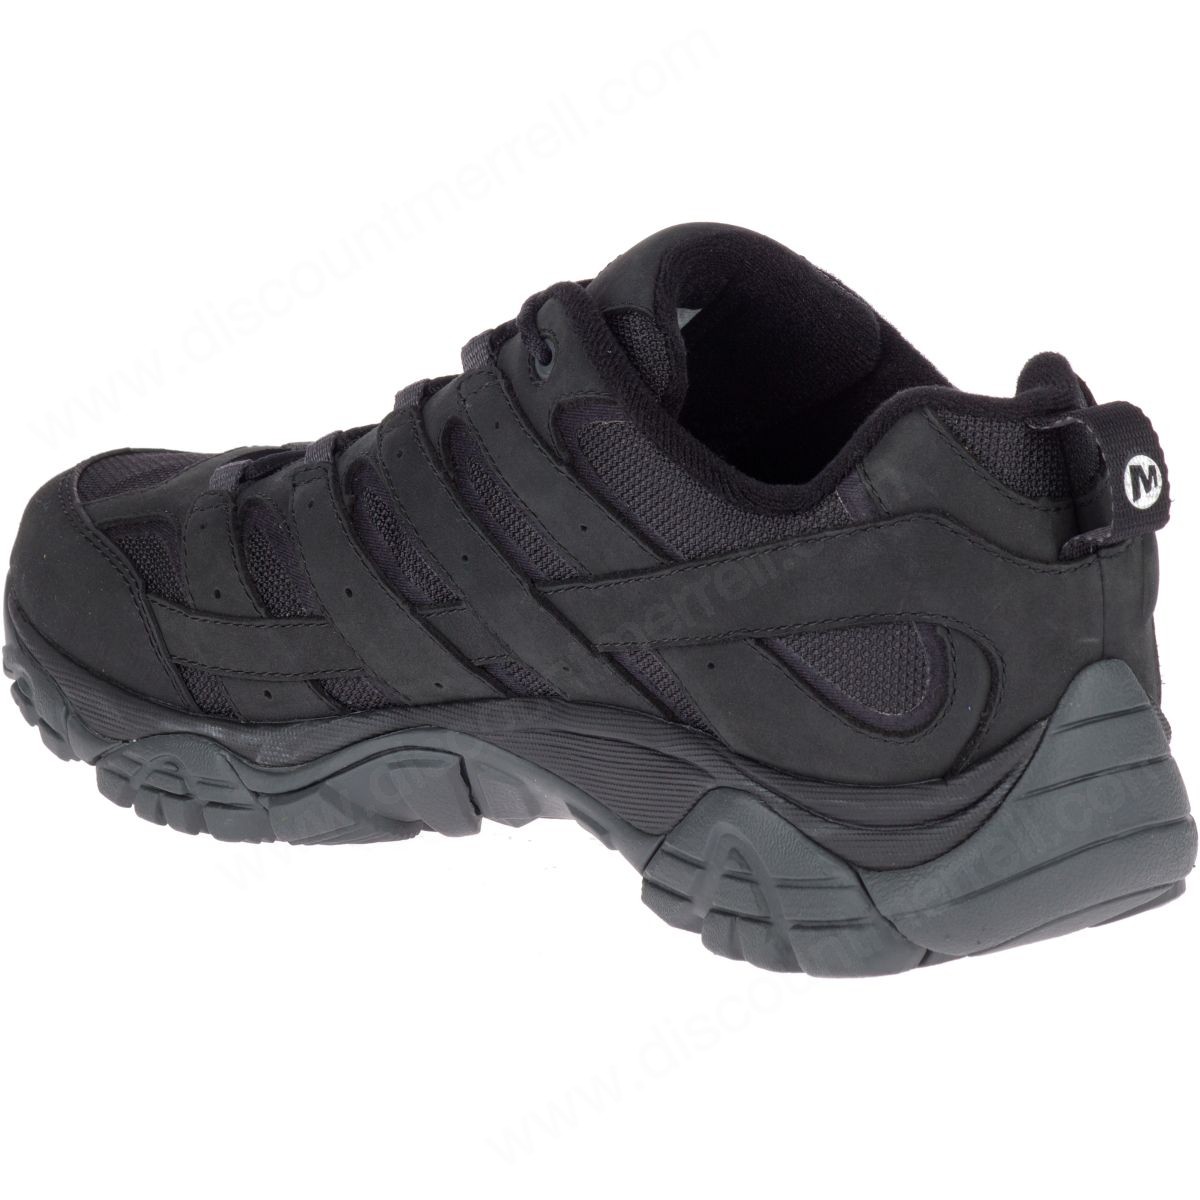 Merrell Man's Moab Mother Of All Boots™ Smooth Black - -6